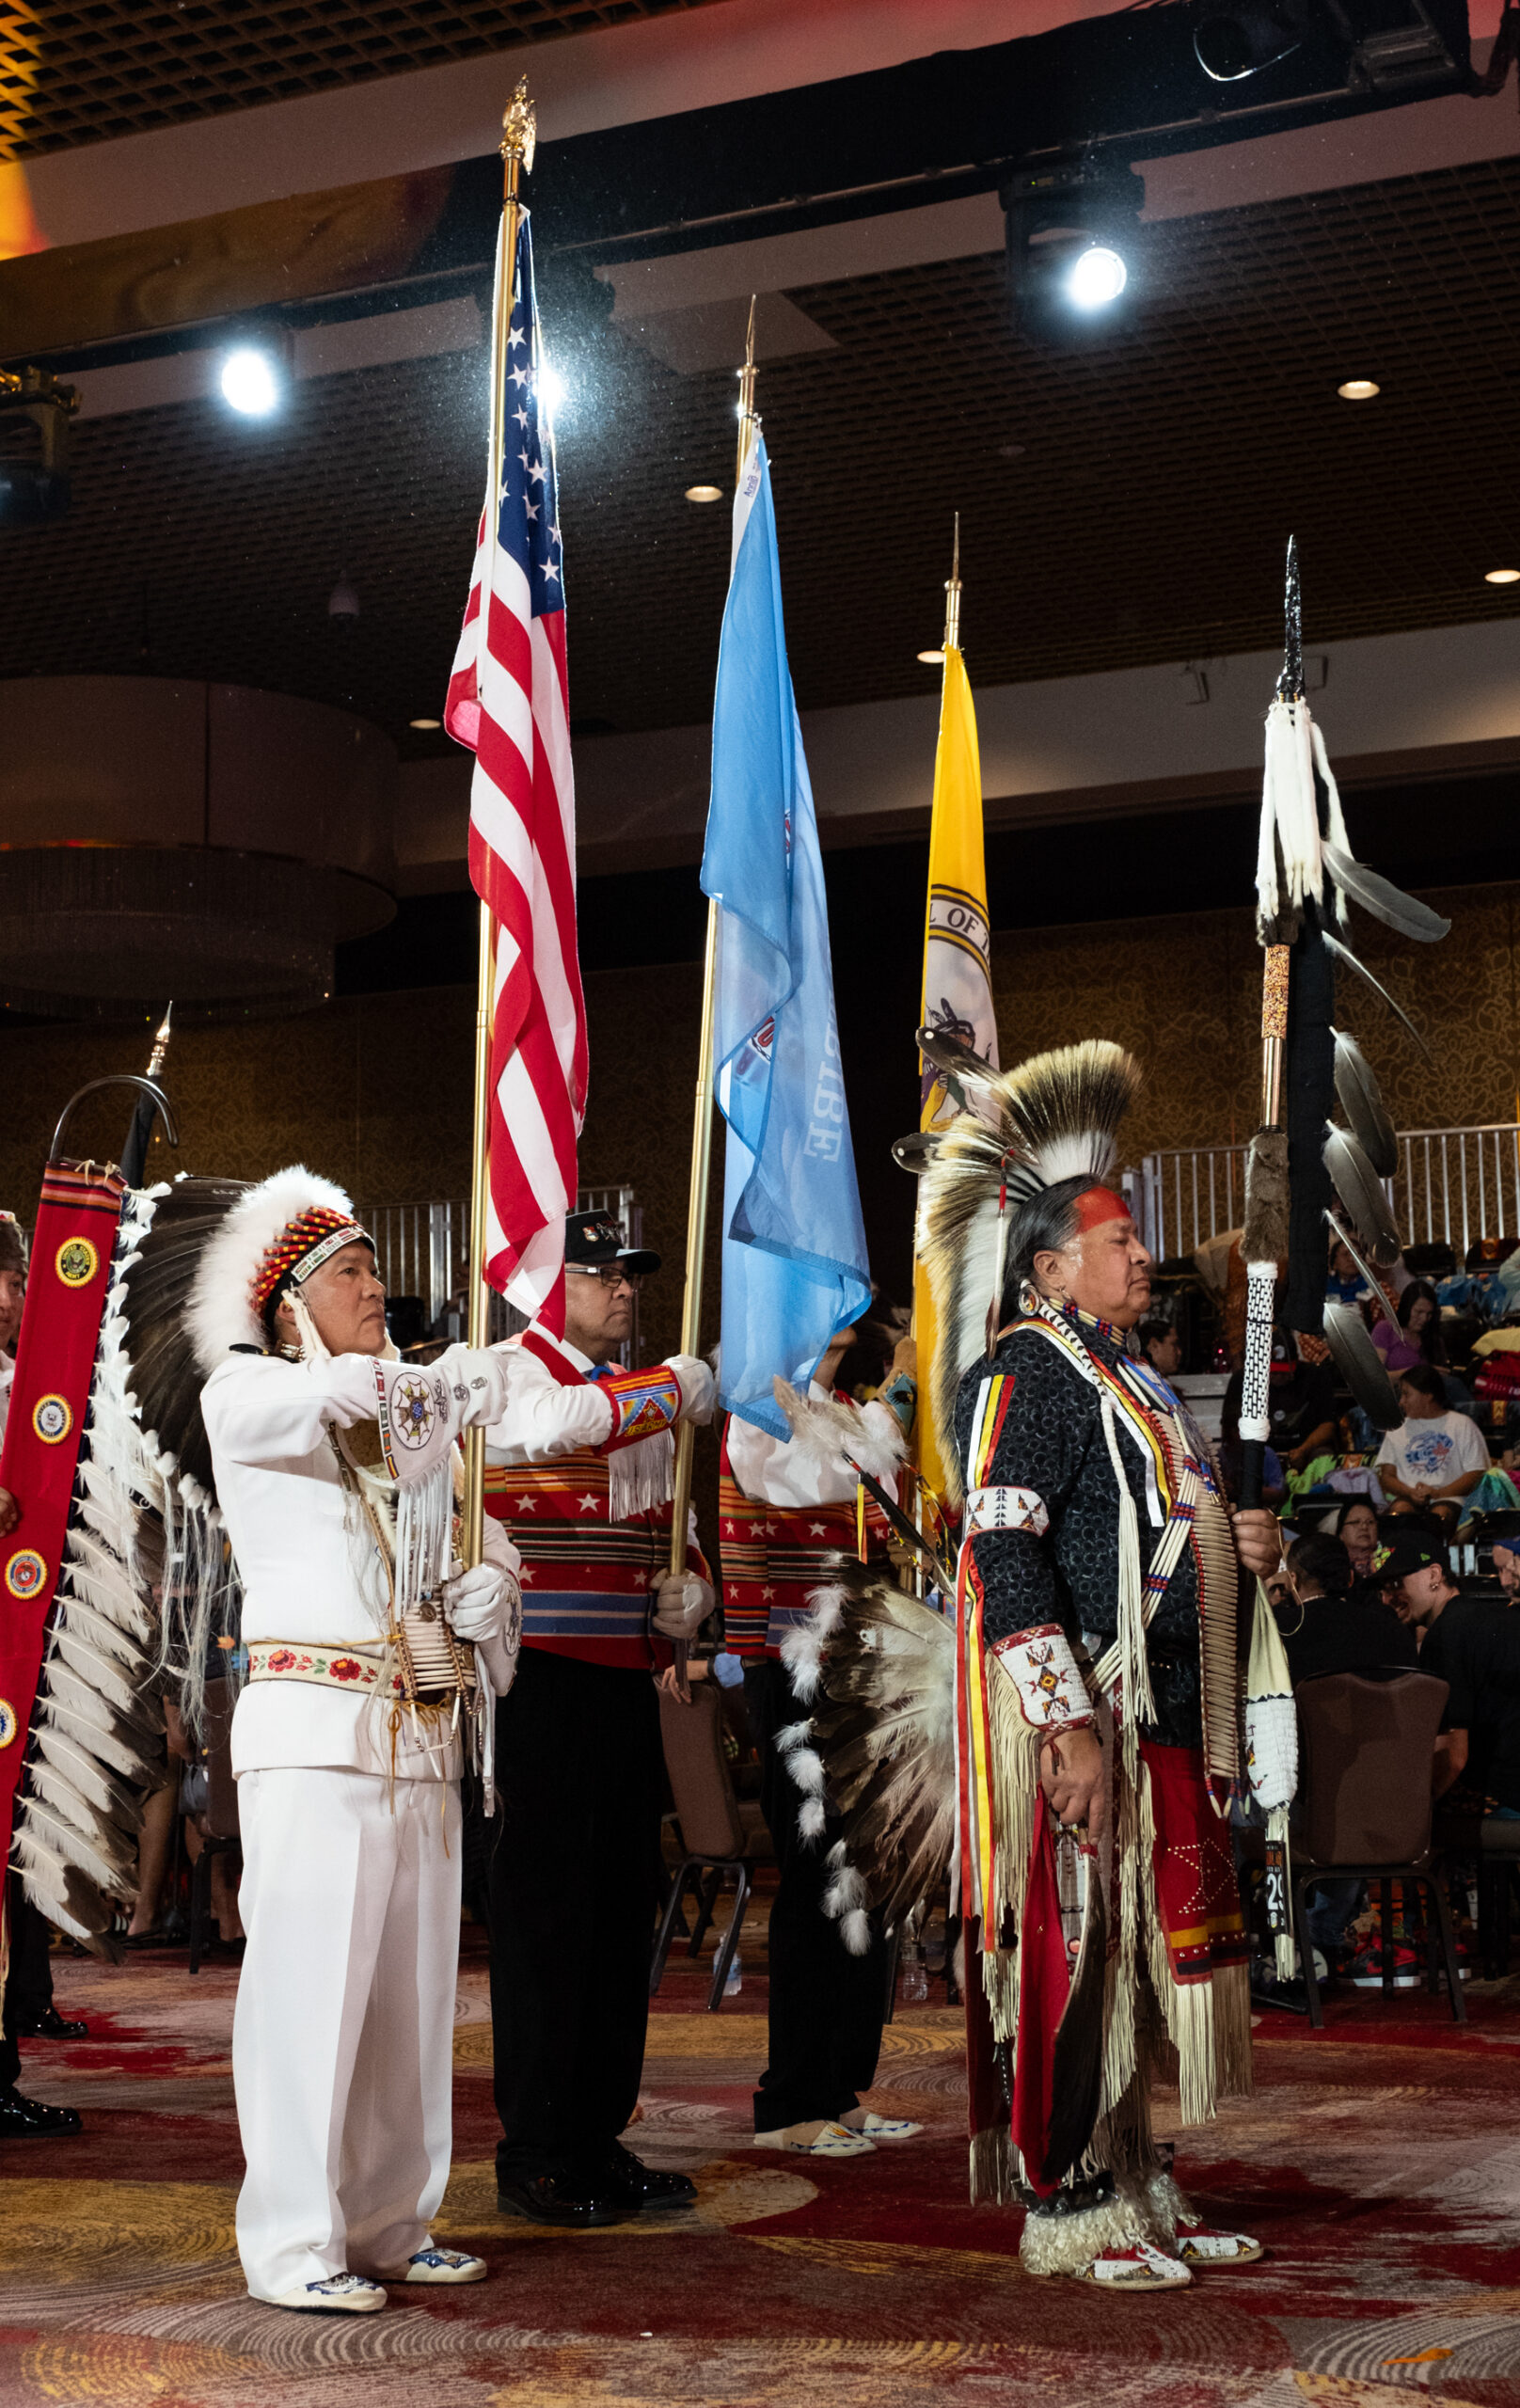 Southern Ute Veterans Association members — Raymond Baker (U.S. Navy Retired), Bruce Valdez (U.S. Army), Gordon Hammond (U.S. Marines), Bruce LeClaire (U.S. Army), the Association served alongside other Color Guards throughout the weekend during Florida’s largest annual powwow.